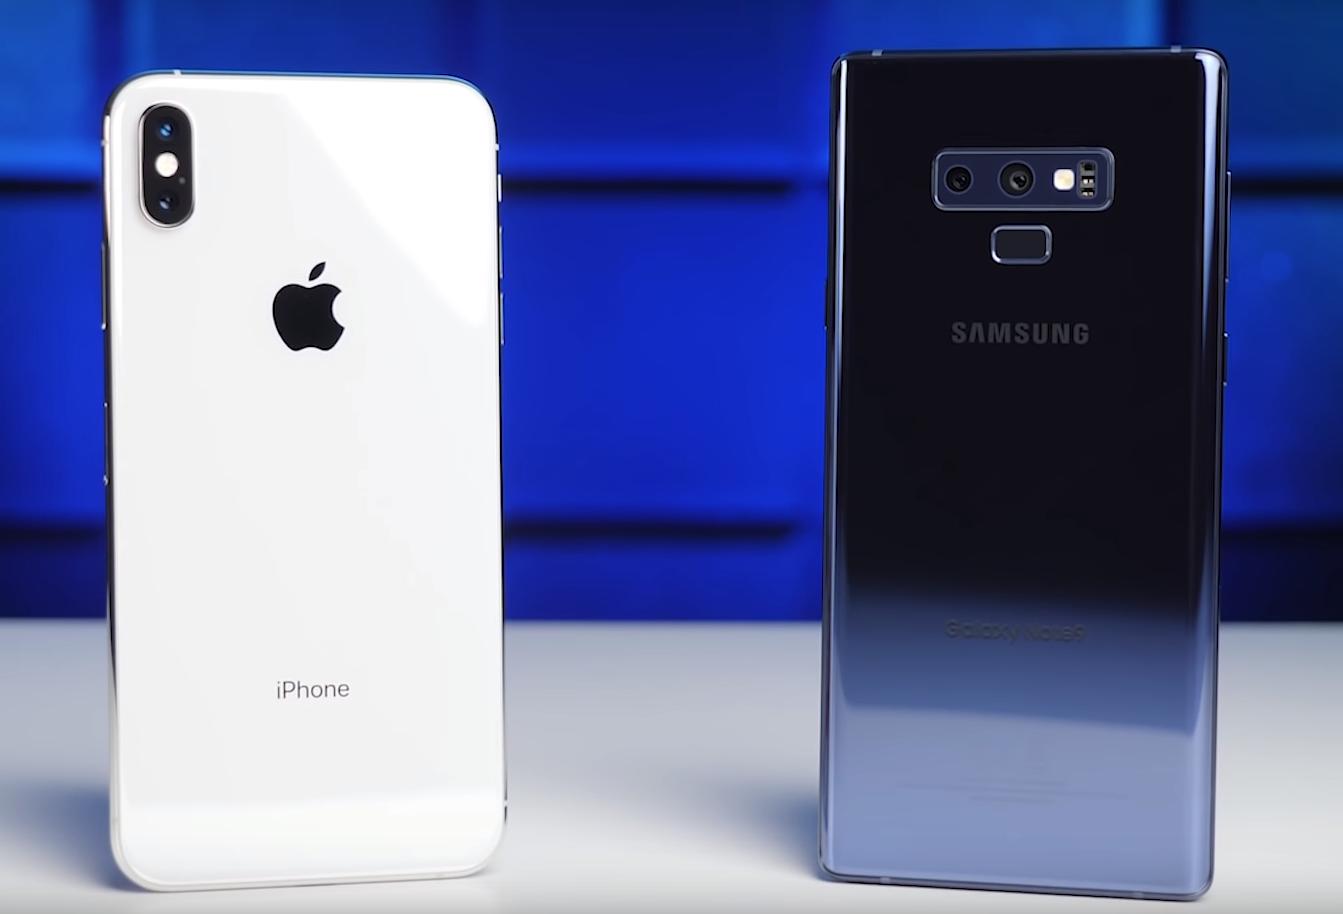 Iphone xs max faster than samsung galaxy note 9 in app launch test 522899 2